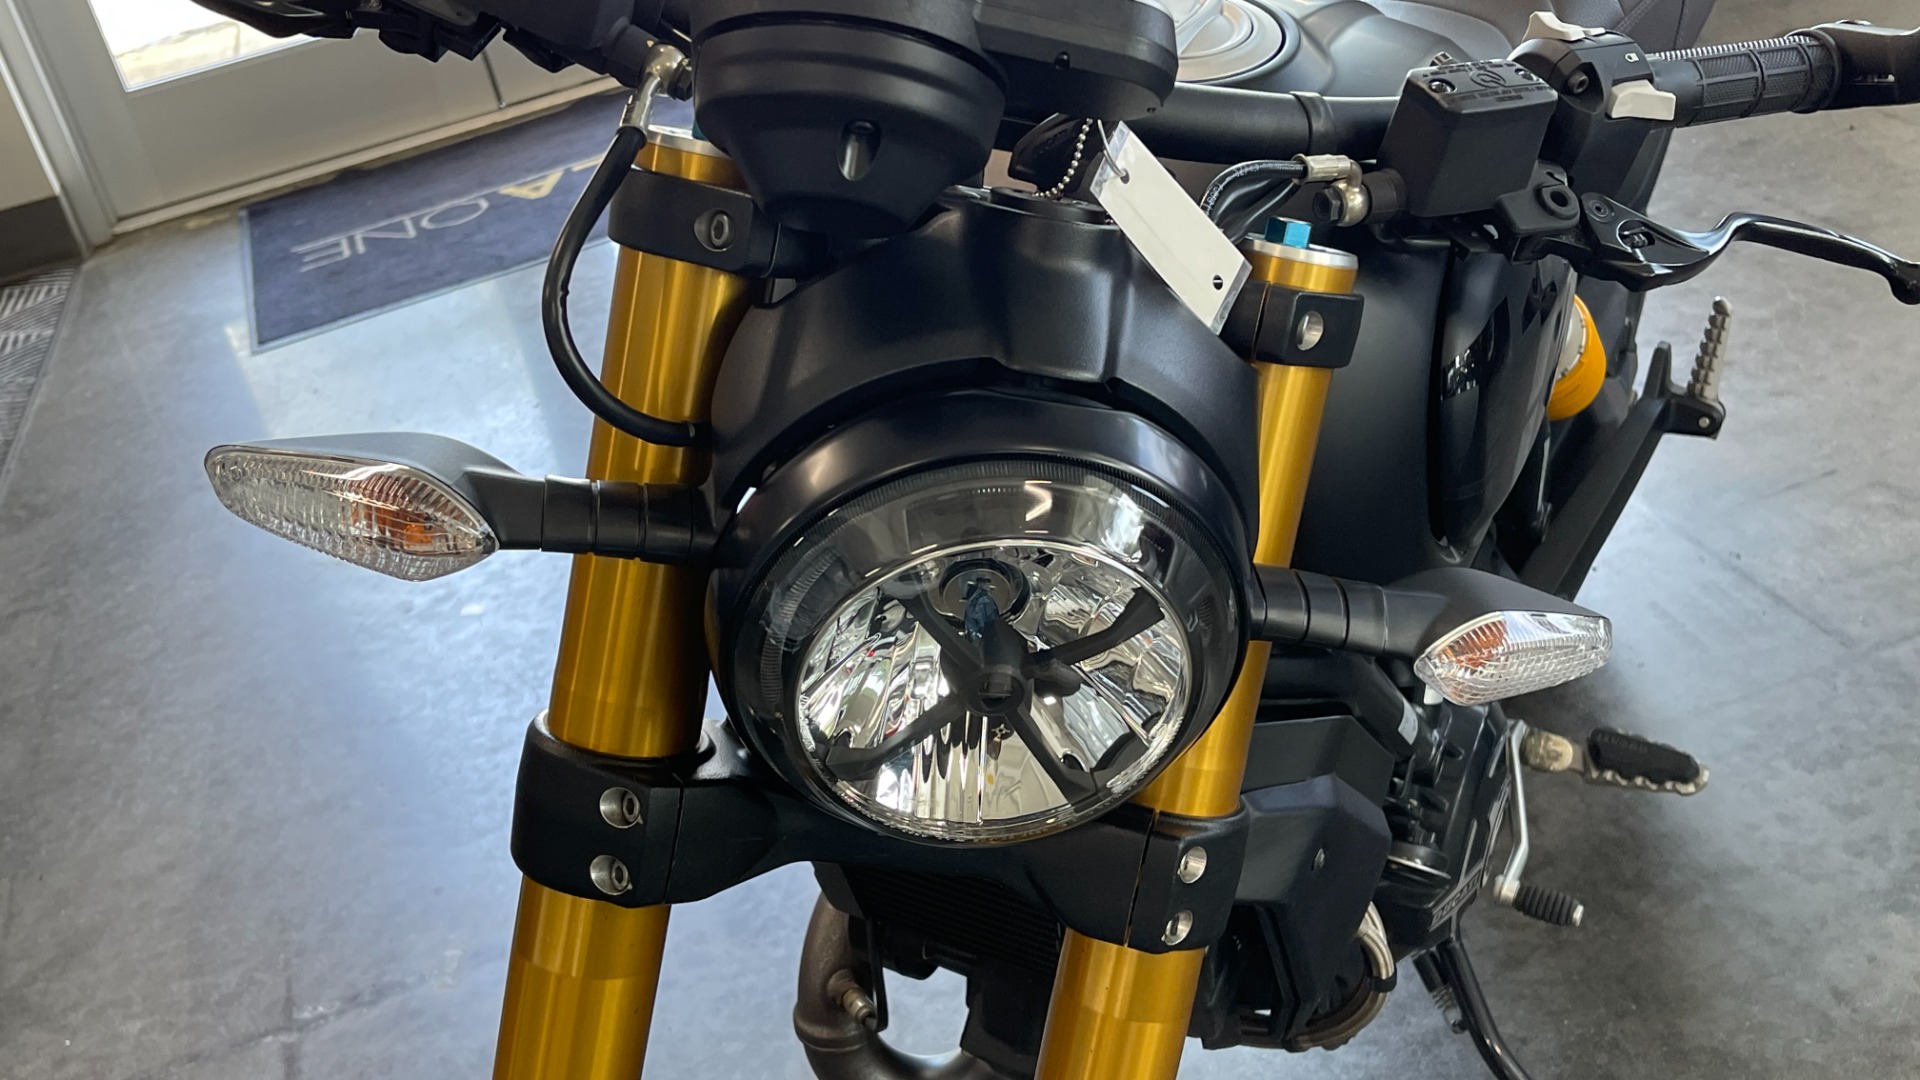 Used 2020 DUCATI SCRAMBLER 1100 SPORT PRO for sale $13,900 at Formula Imports in Charlotte NC 28227 8